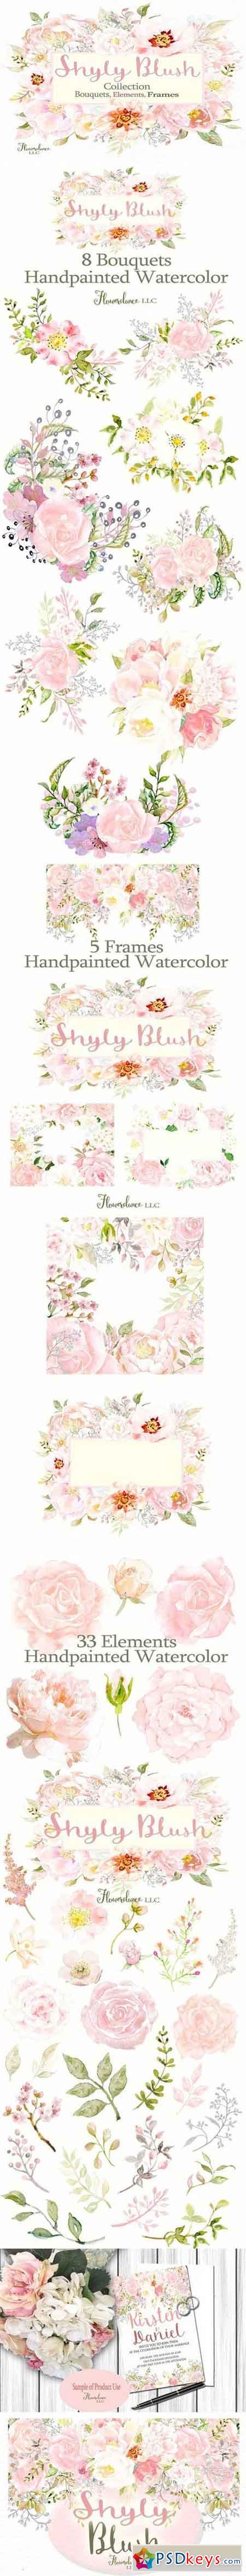 Shyly Blush Floral Collection 1438038